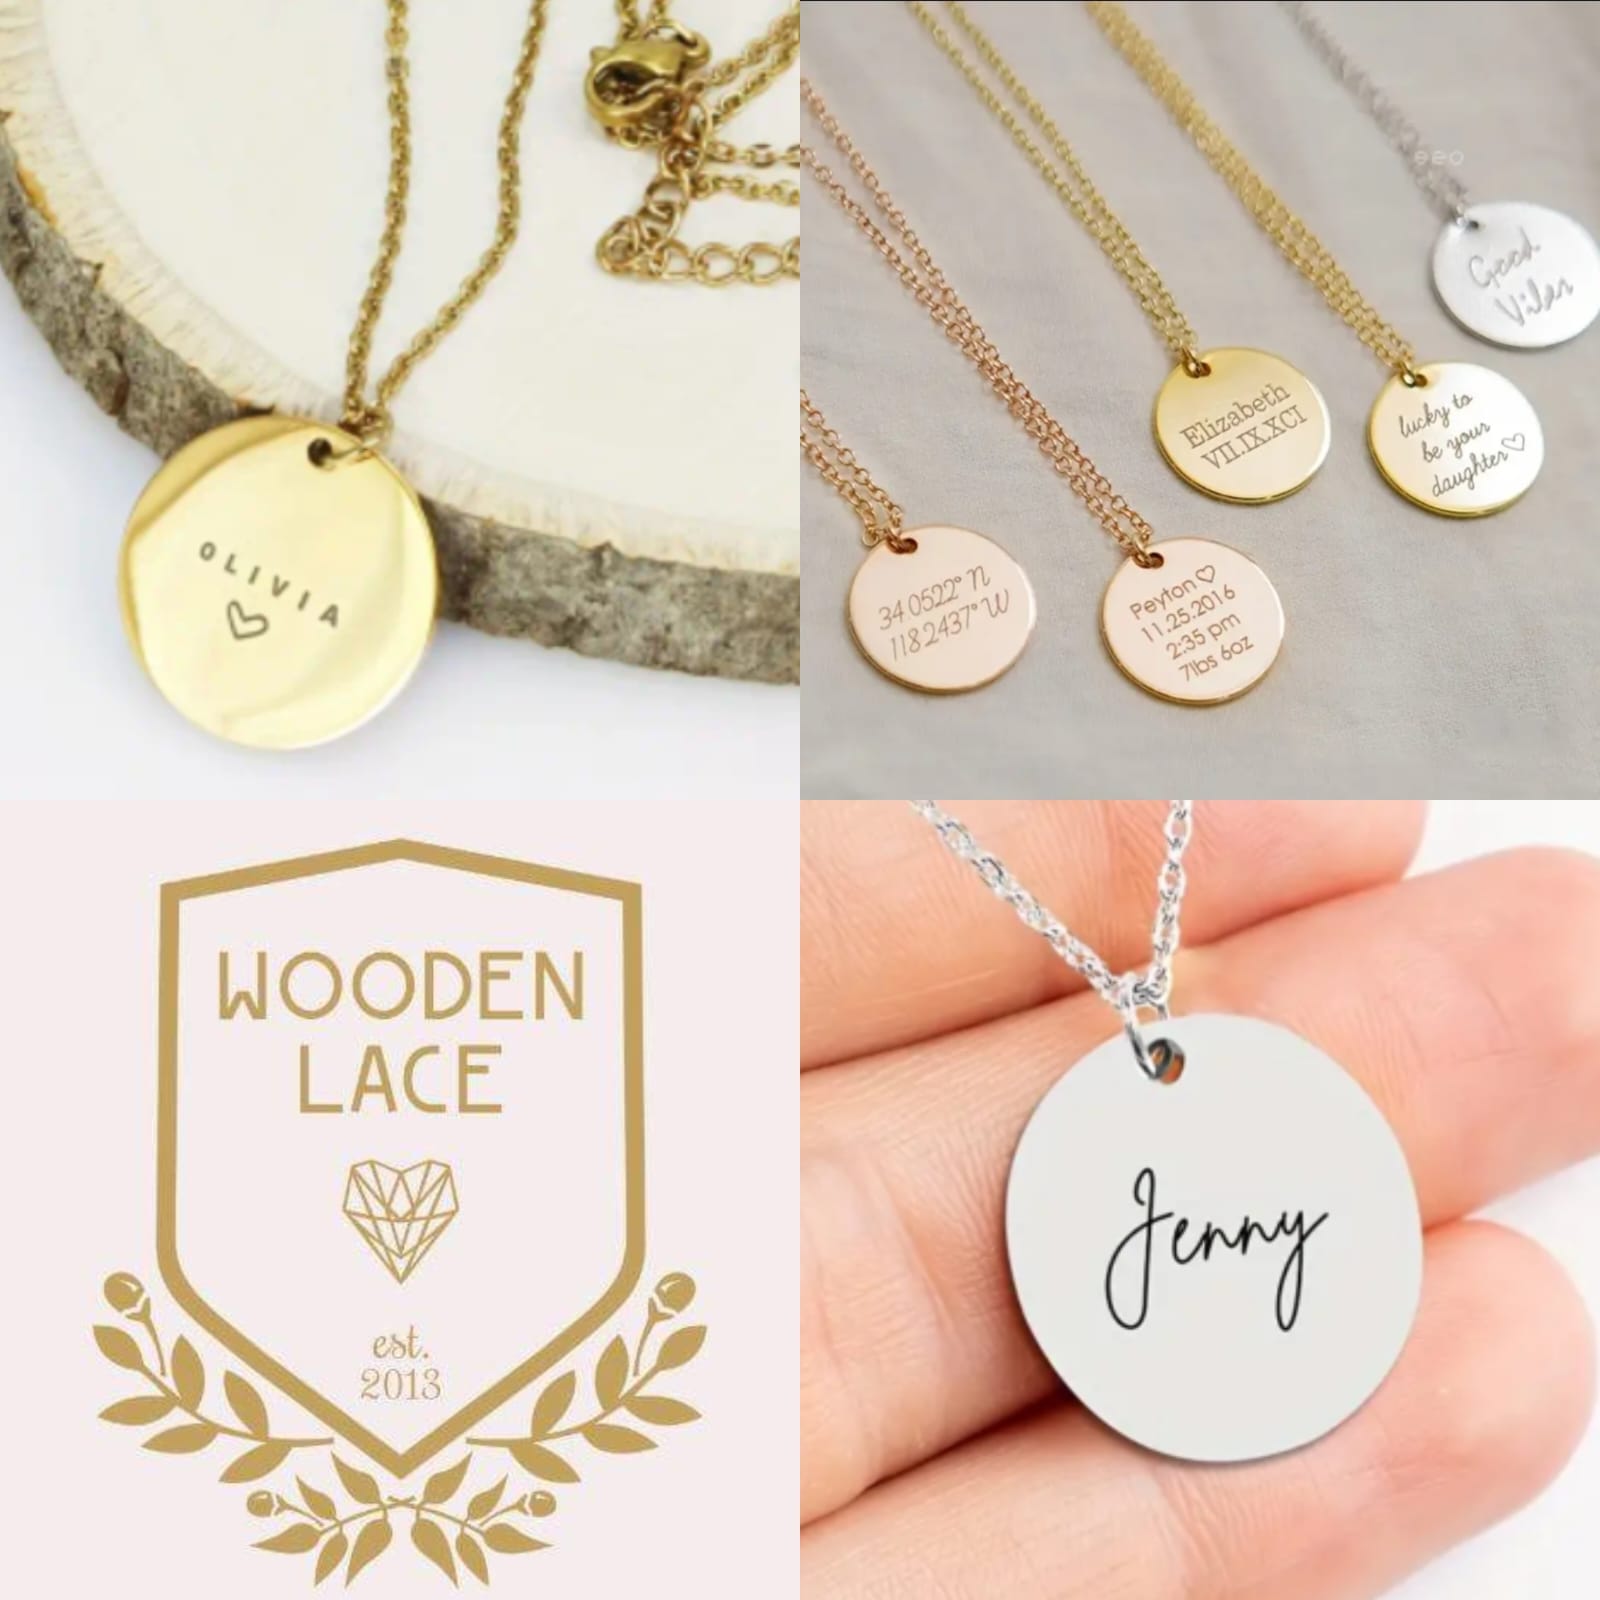 One disc necklace promo R650 with your own engraving on. Rosegold, gold or silver. Tarnishproof or waterproof